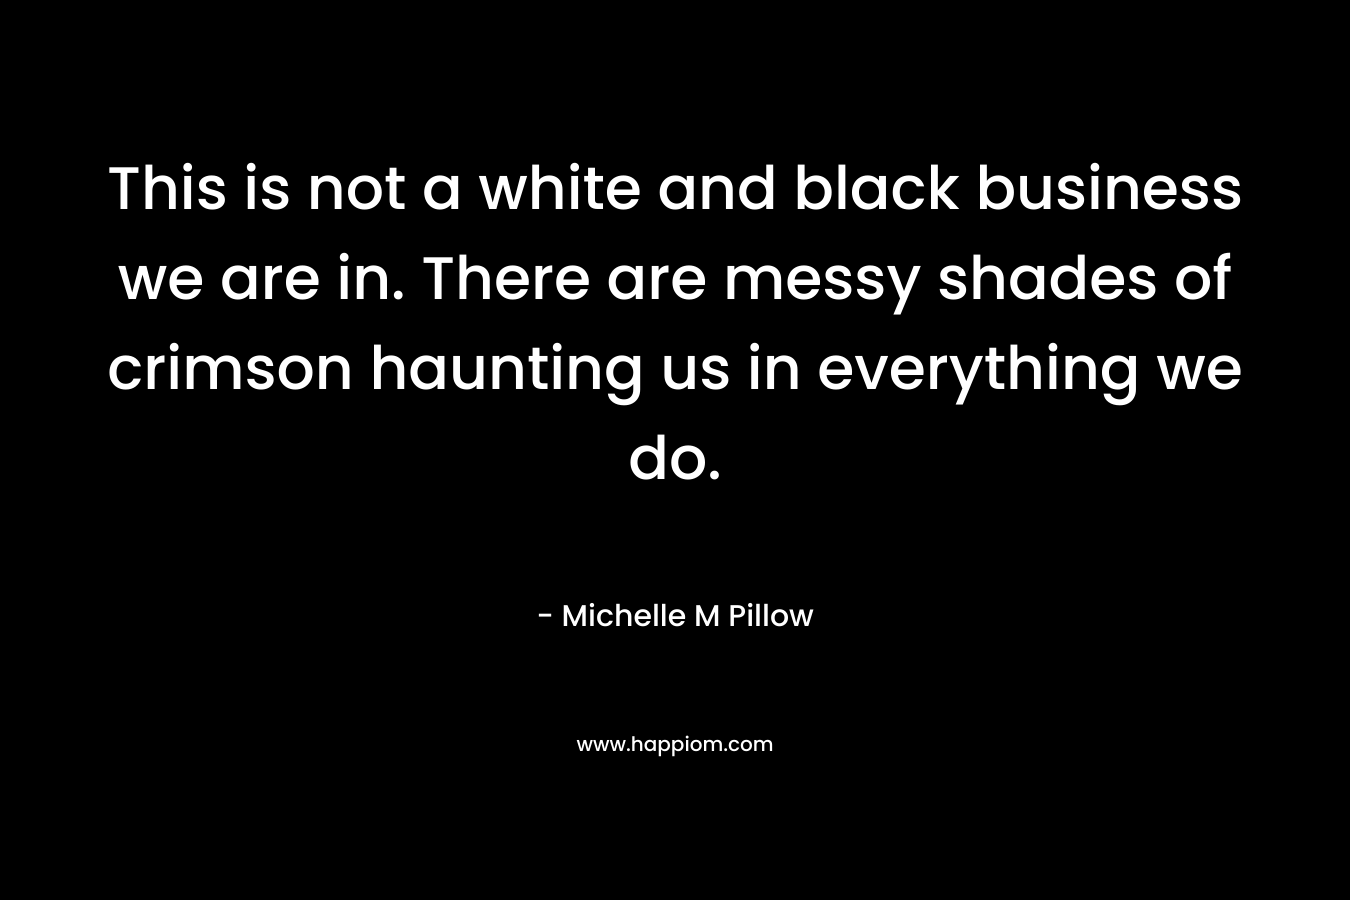 This is not a white and black business we are in. There are messy shades of crimson haunting us in everything we do. – Michelle M Pillow